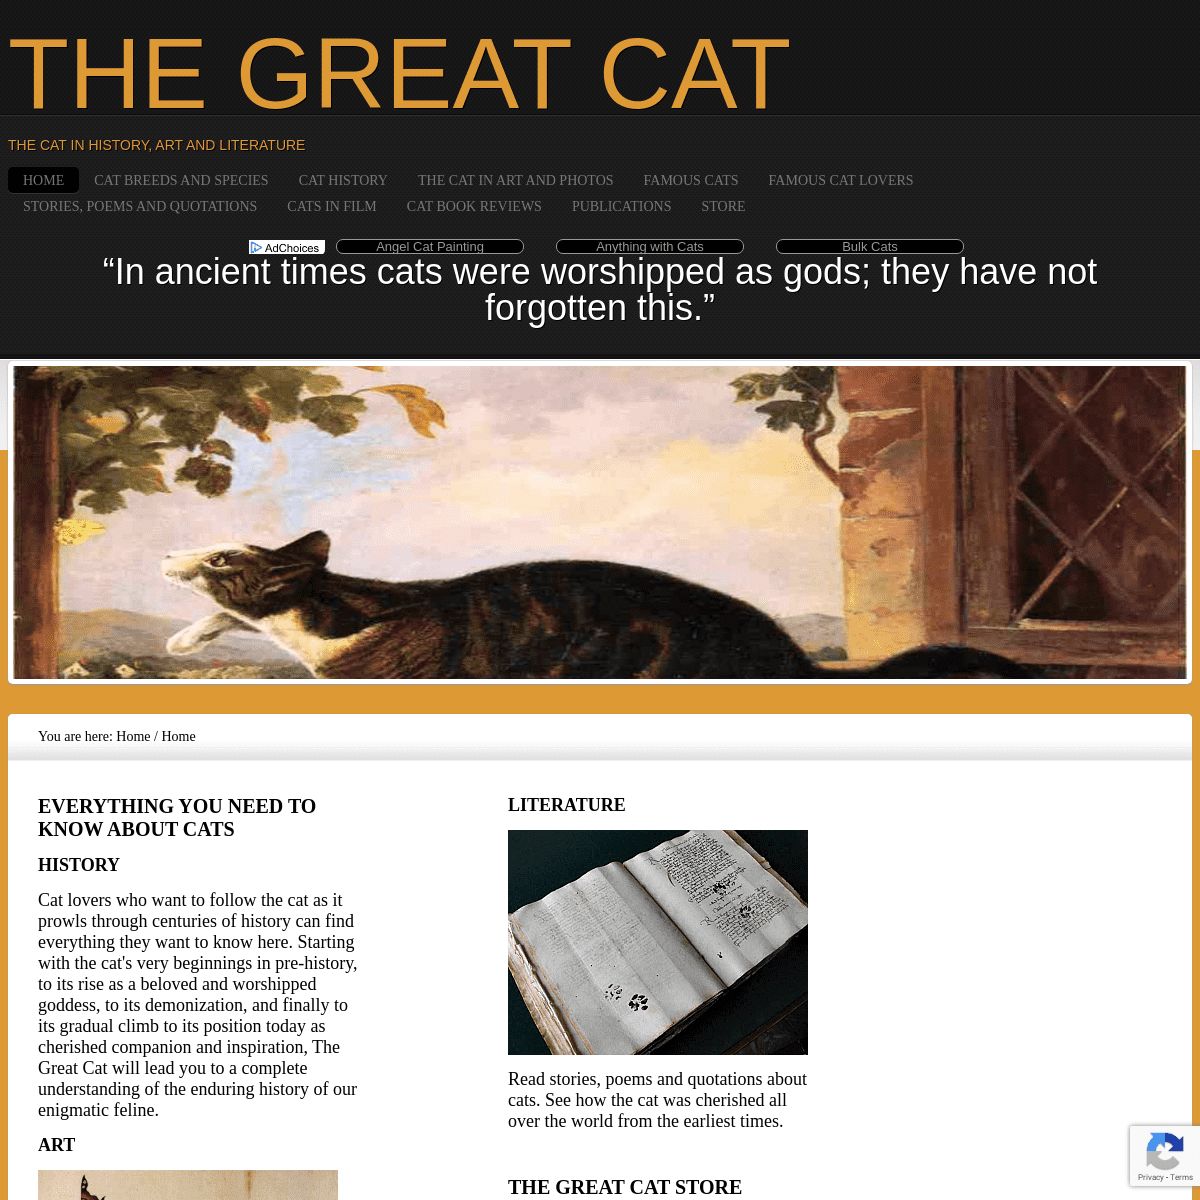 A complete backup of thegreatcat.org